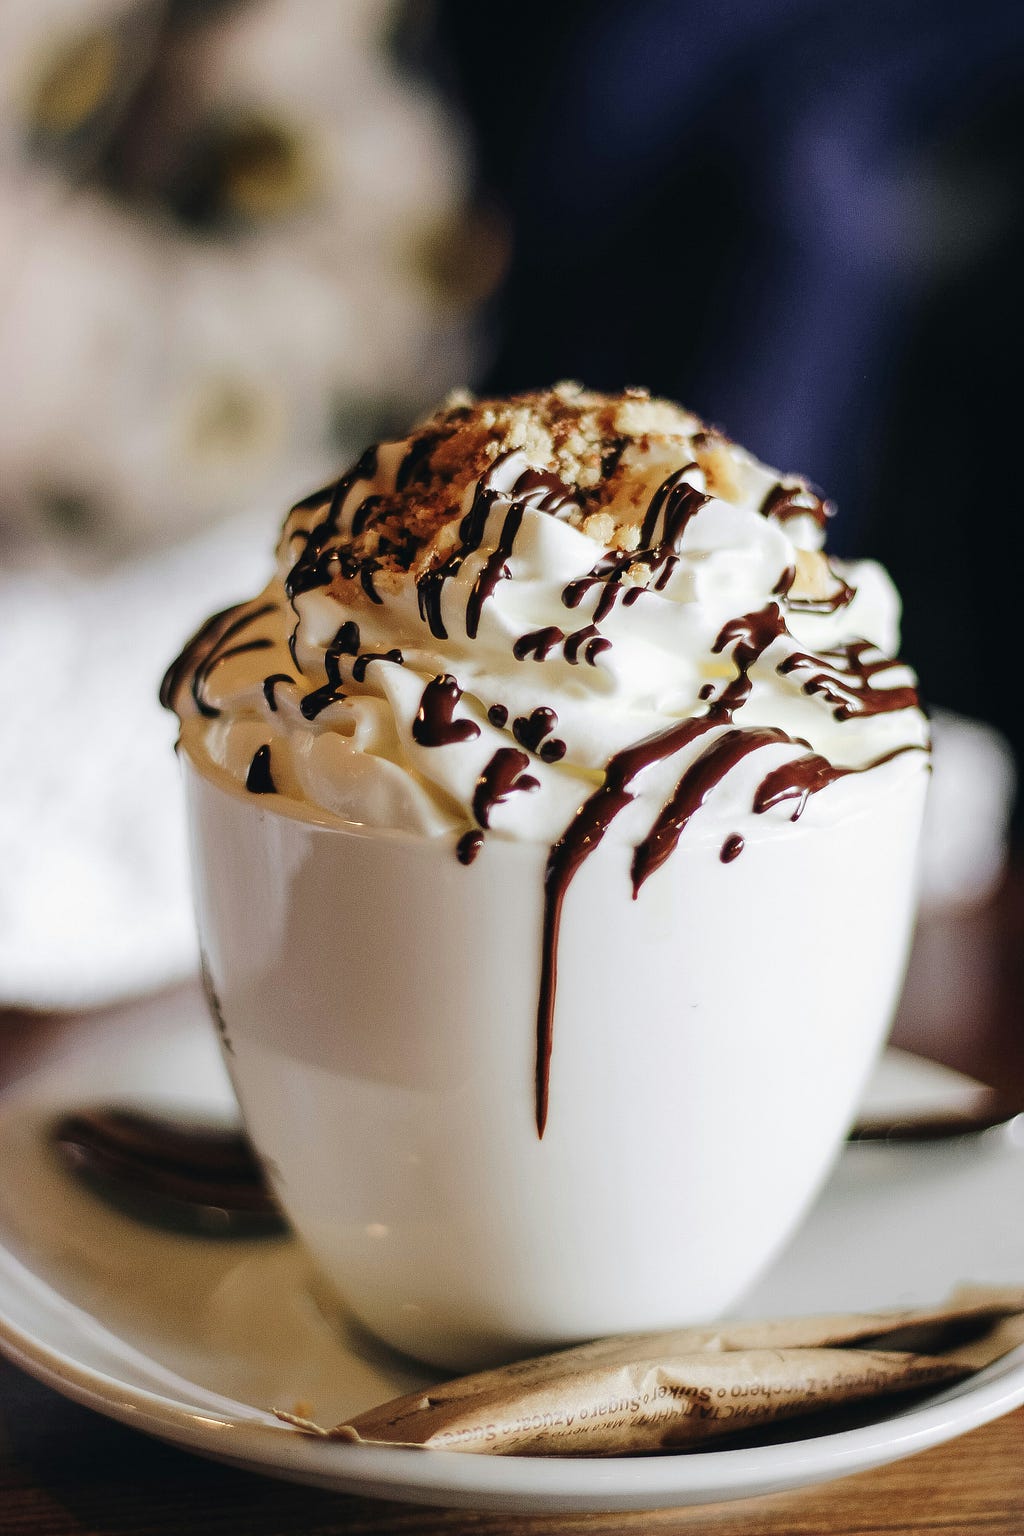 hot chocolate drink with whipped cream, drizzle chocolate and nuts